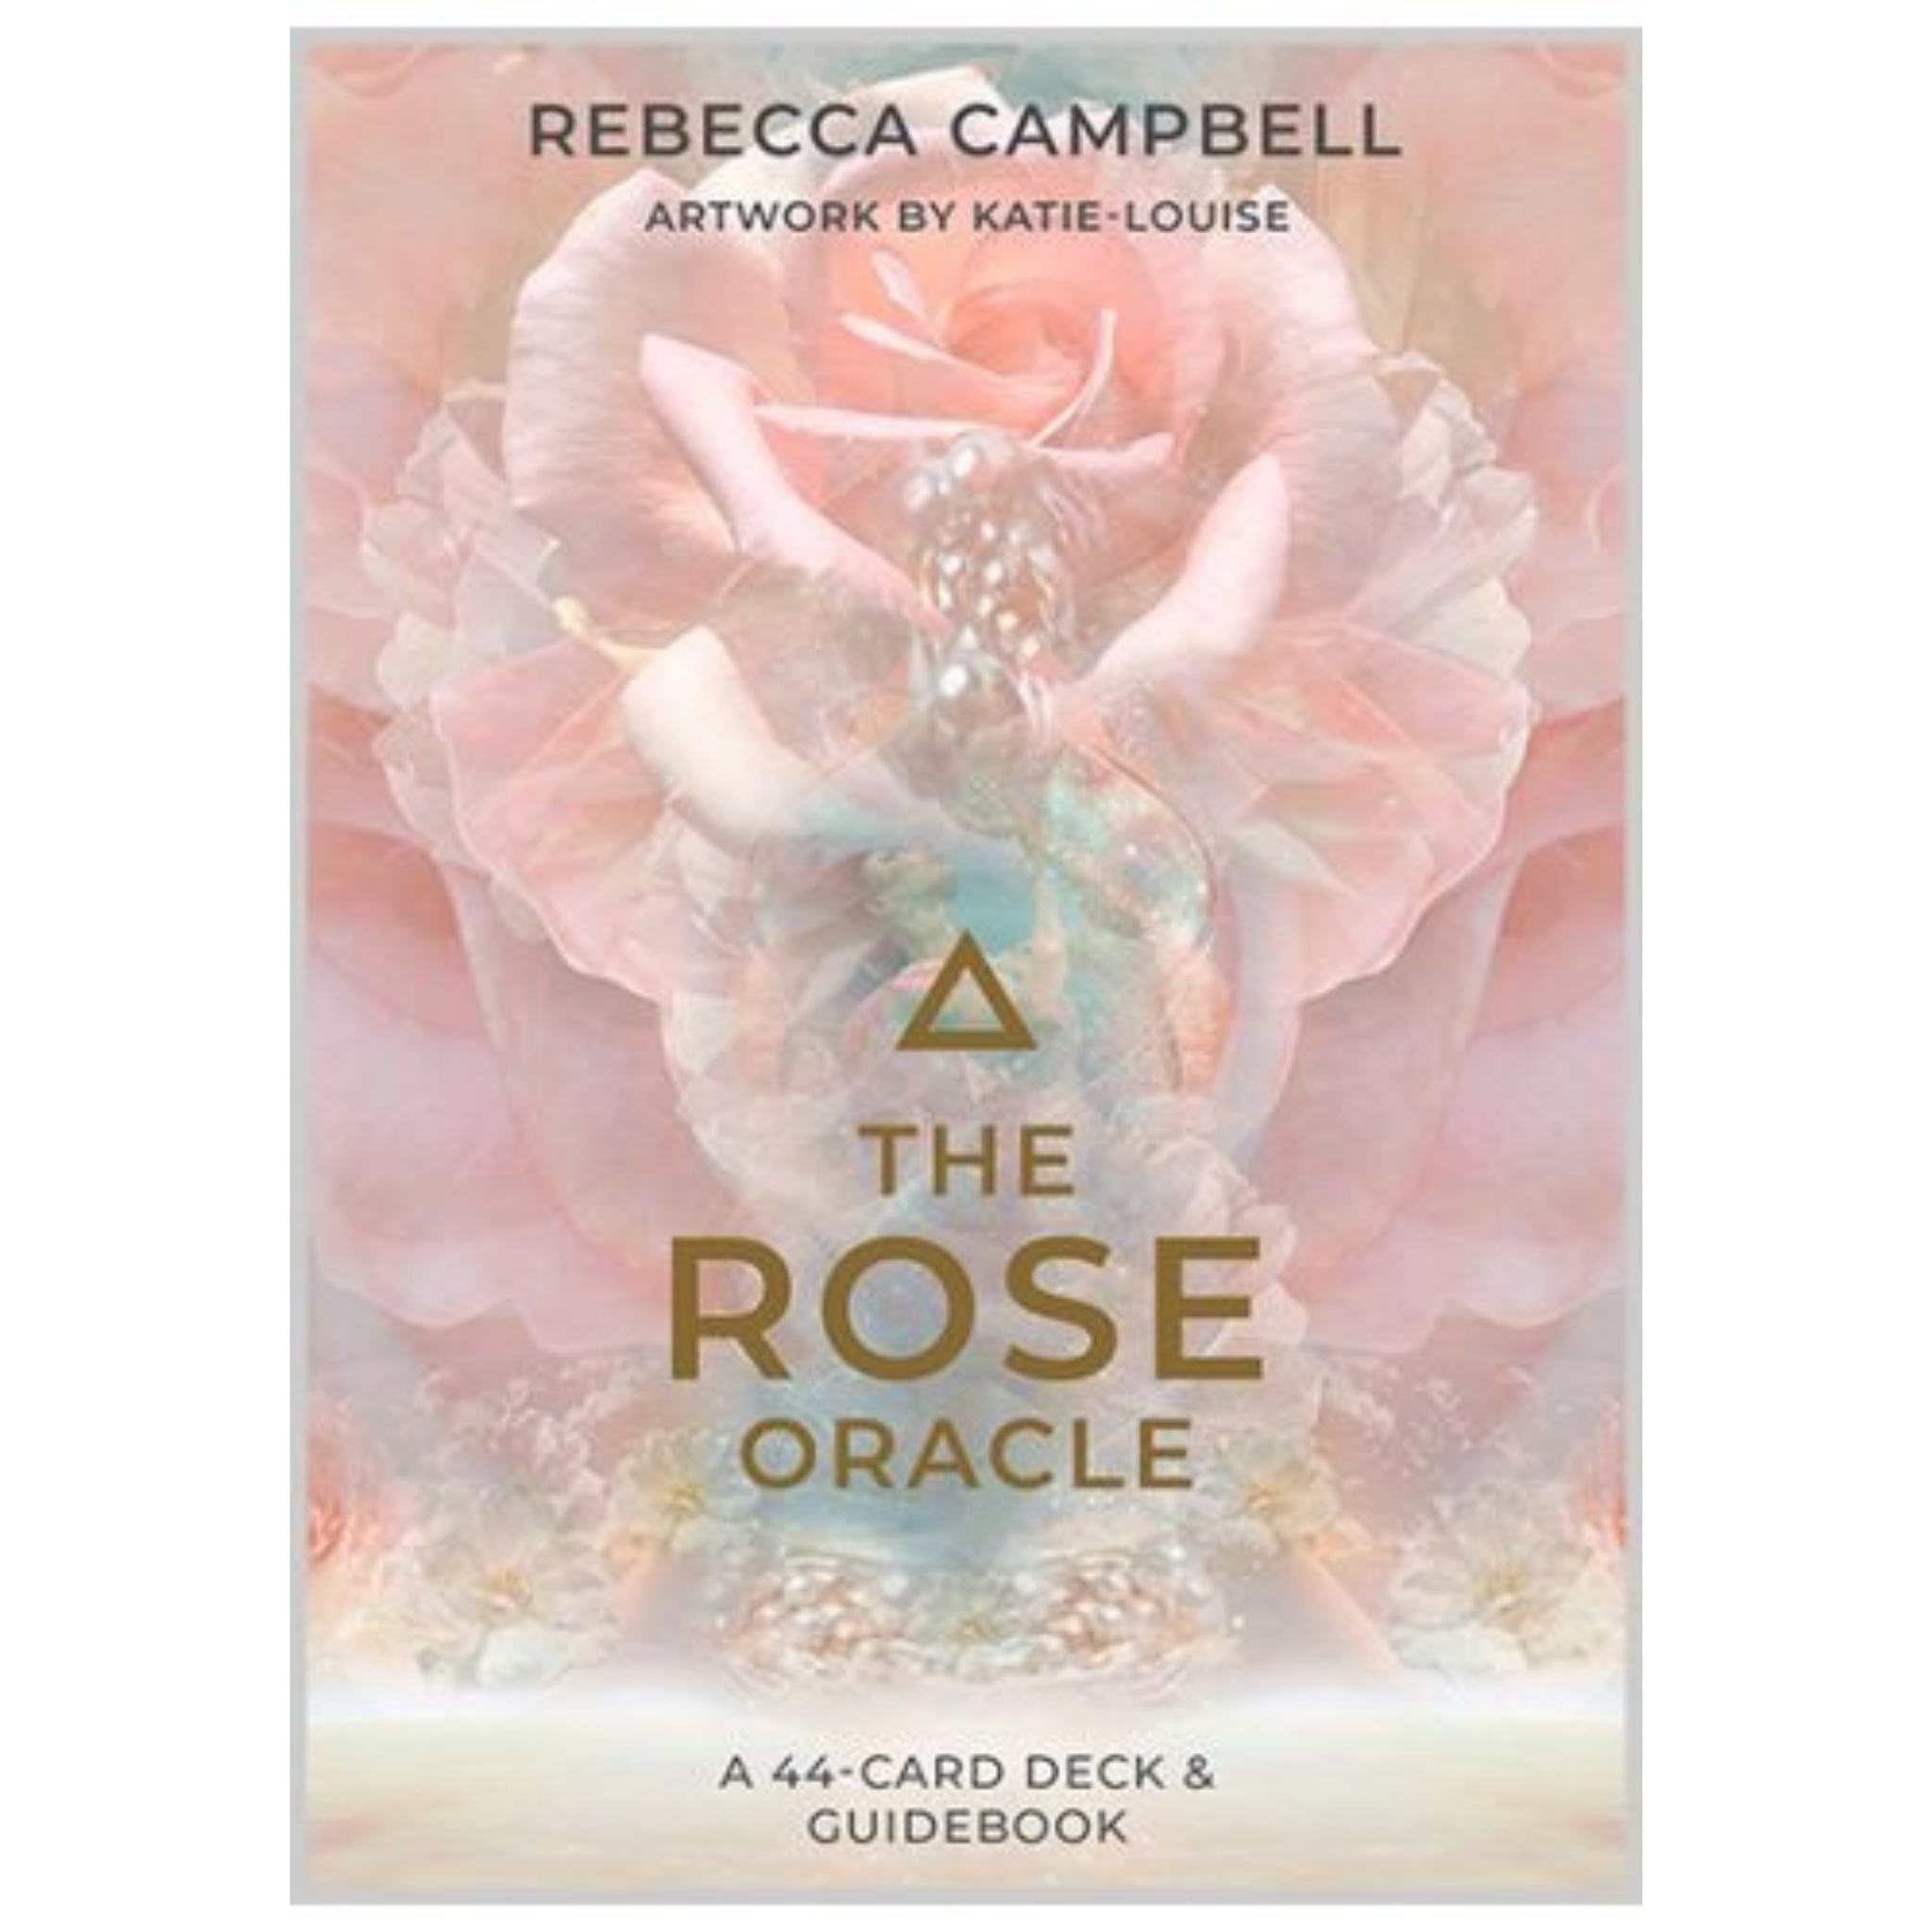 The Rose Oracle by Rebecca Campbell